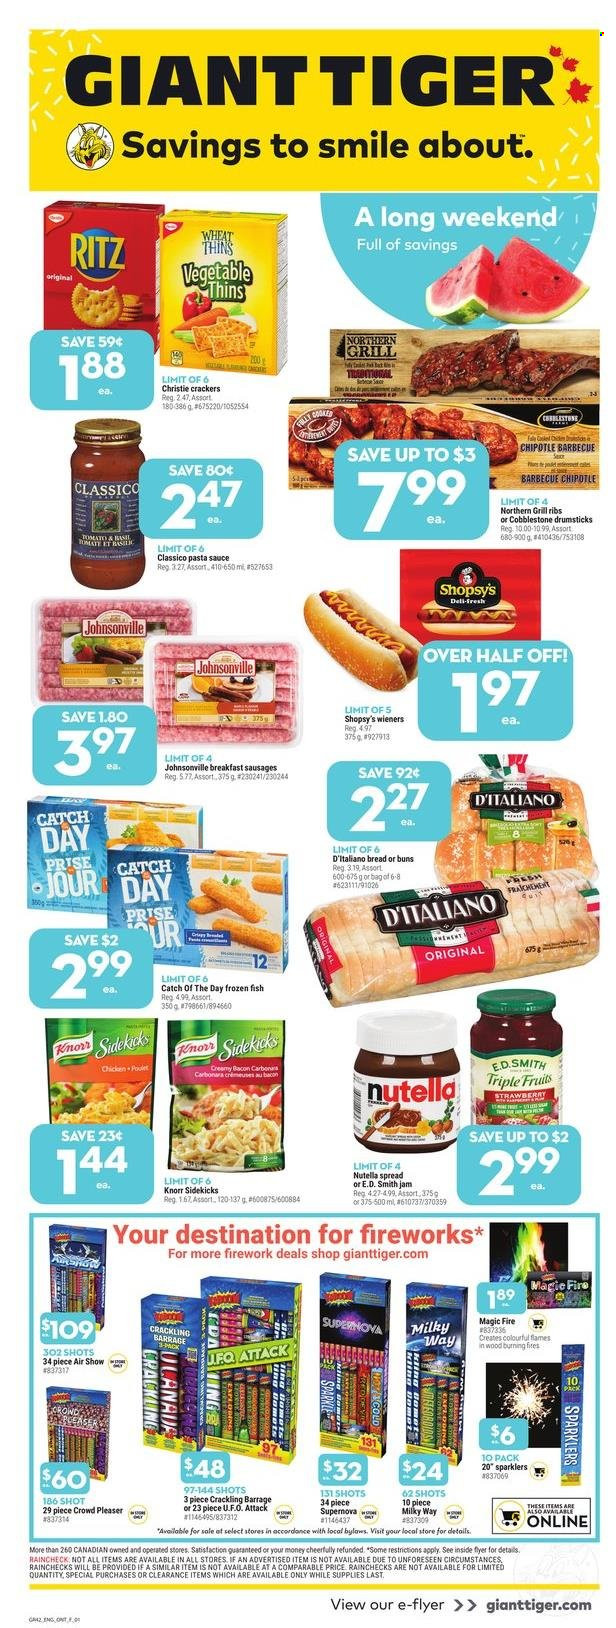 thumbnail - Giant Tiger Flyer - May 18, 2022 - May 24, 2022 - Sales products - bread, buns, fish, pasta sauce, sauce, bacon, Johnsonville, sausage, Milky Way, crackers, RITZ, Thins, Classico, fruit jam, fireworks, Nutella, Knorr. Page 1.